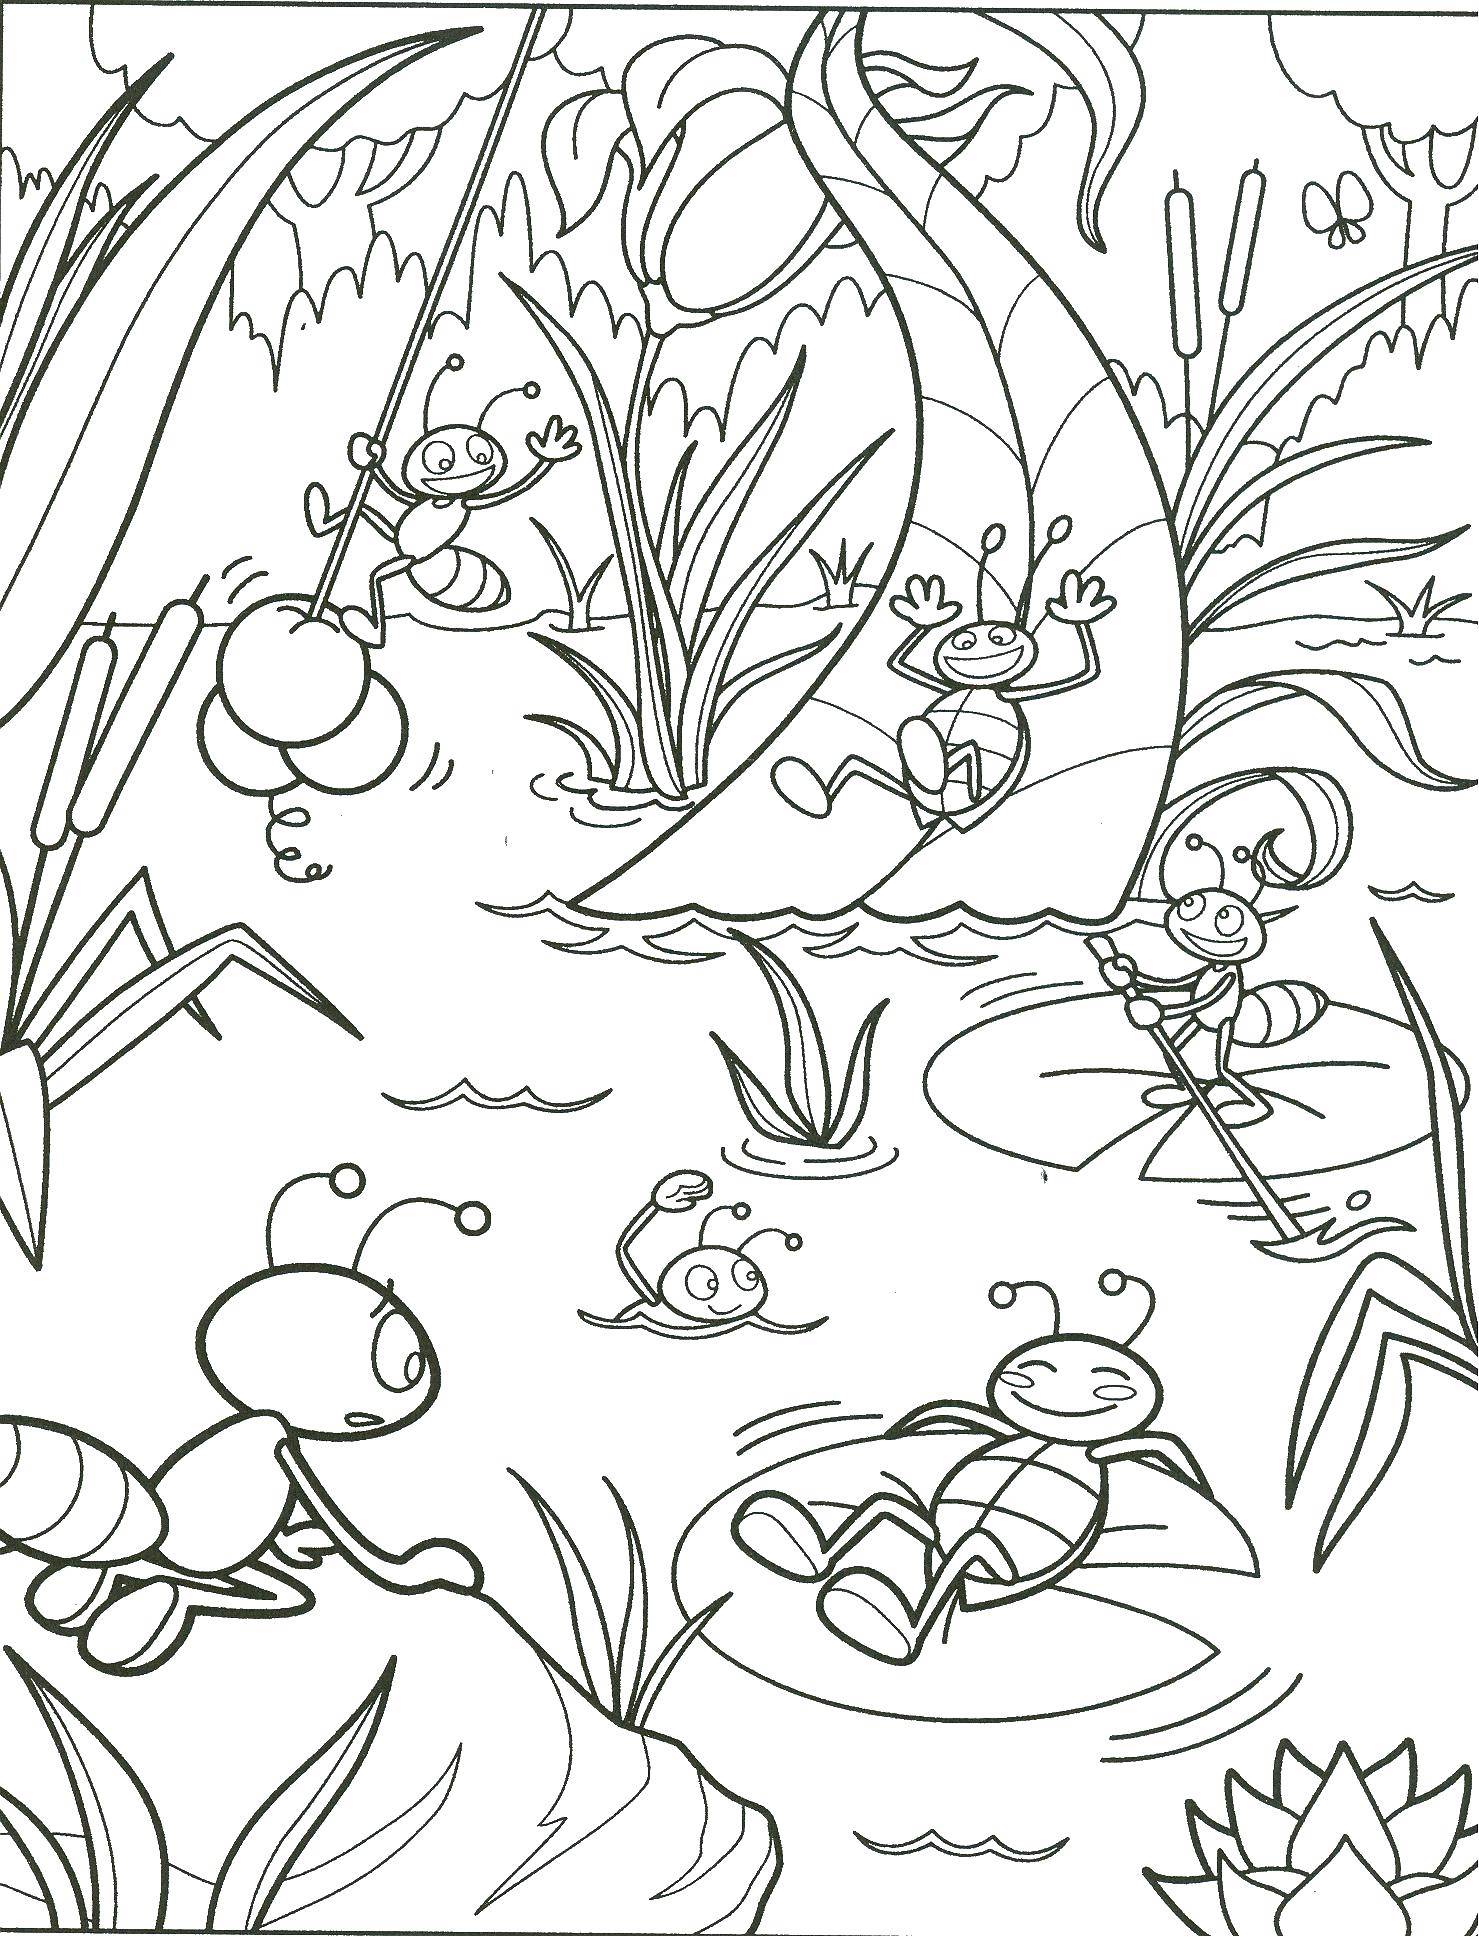 Coloring Ants rest. Category Summer fun. Tags:  Insects, ant.